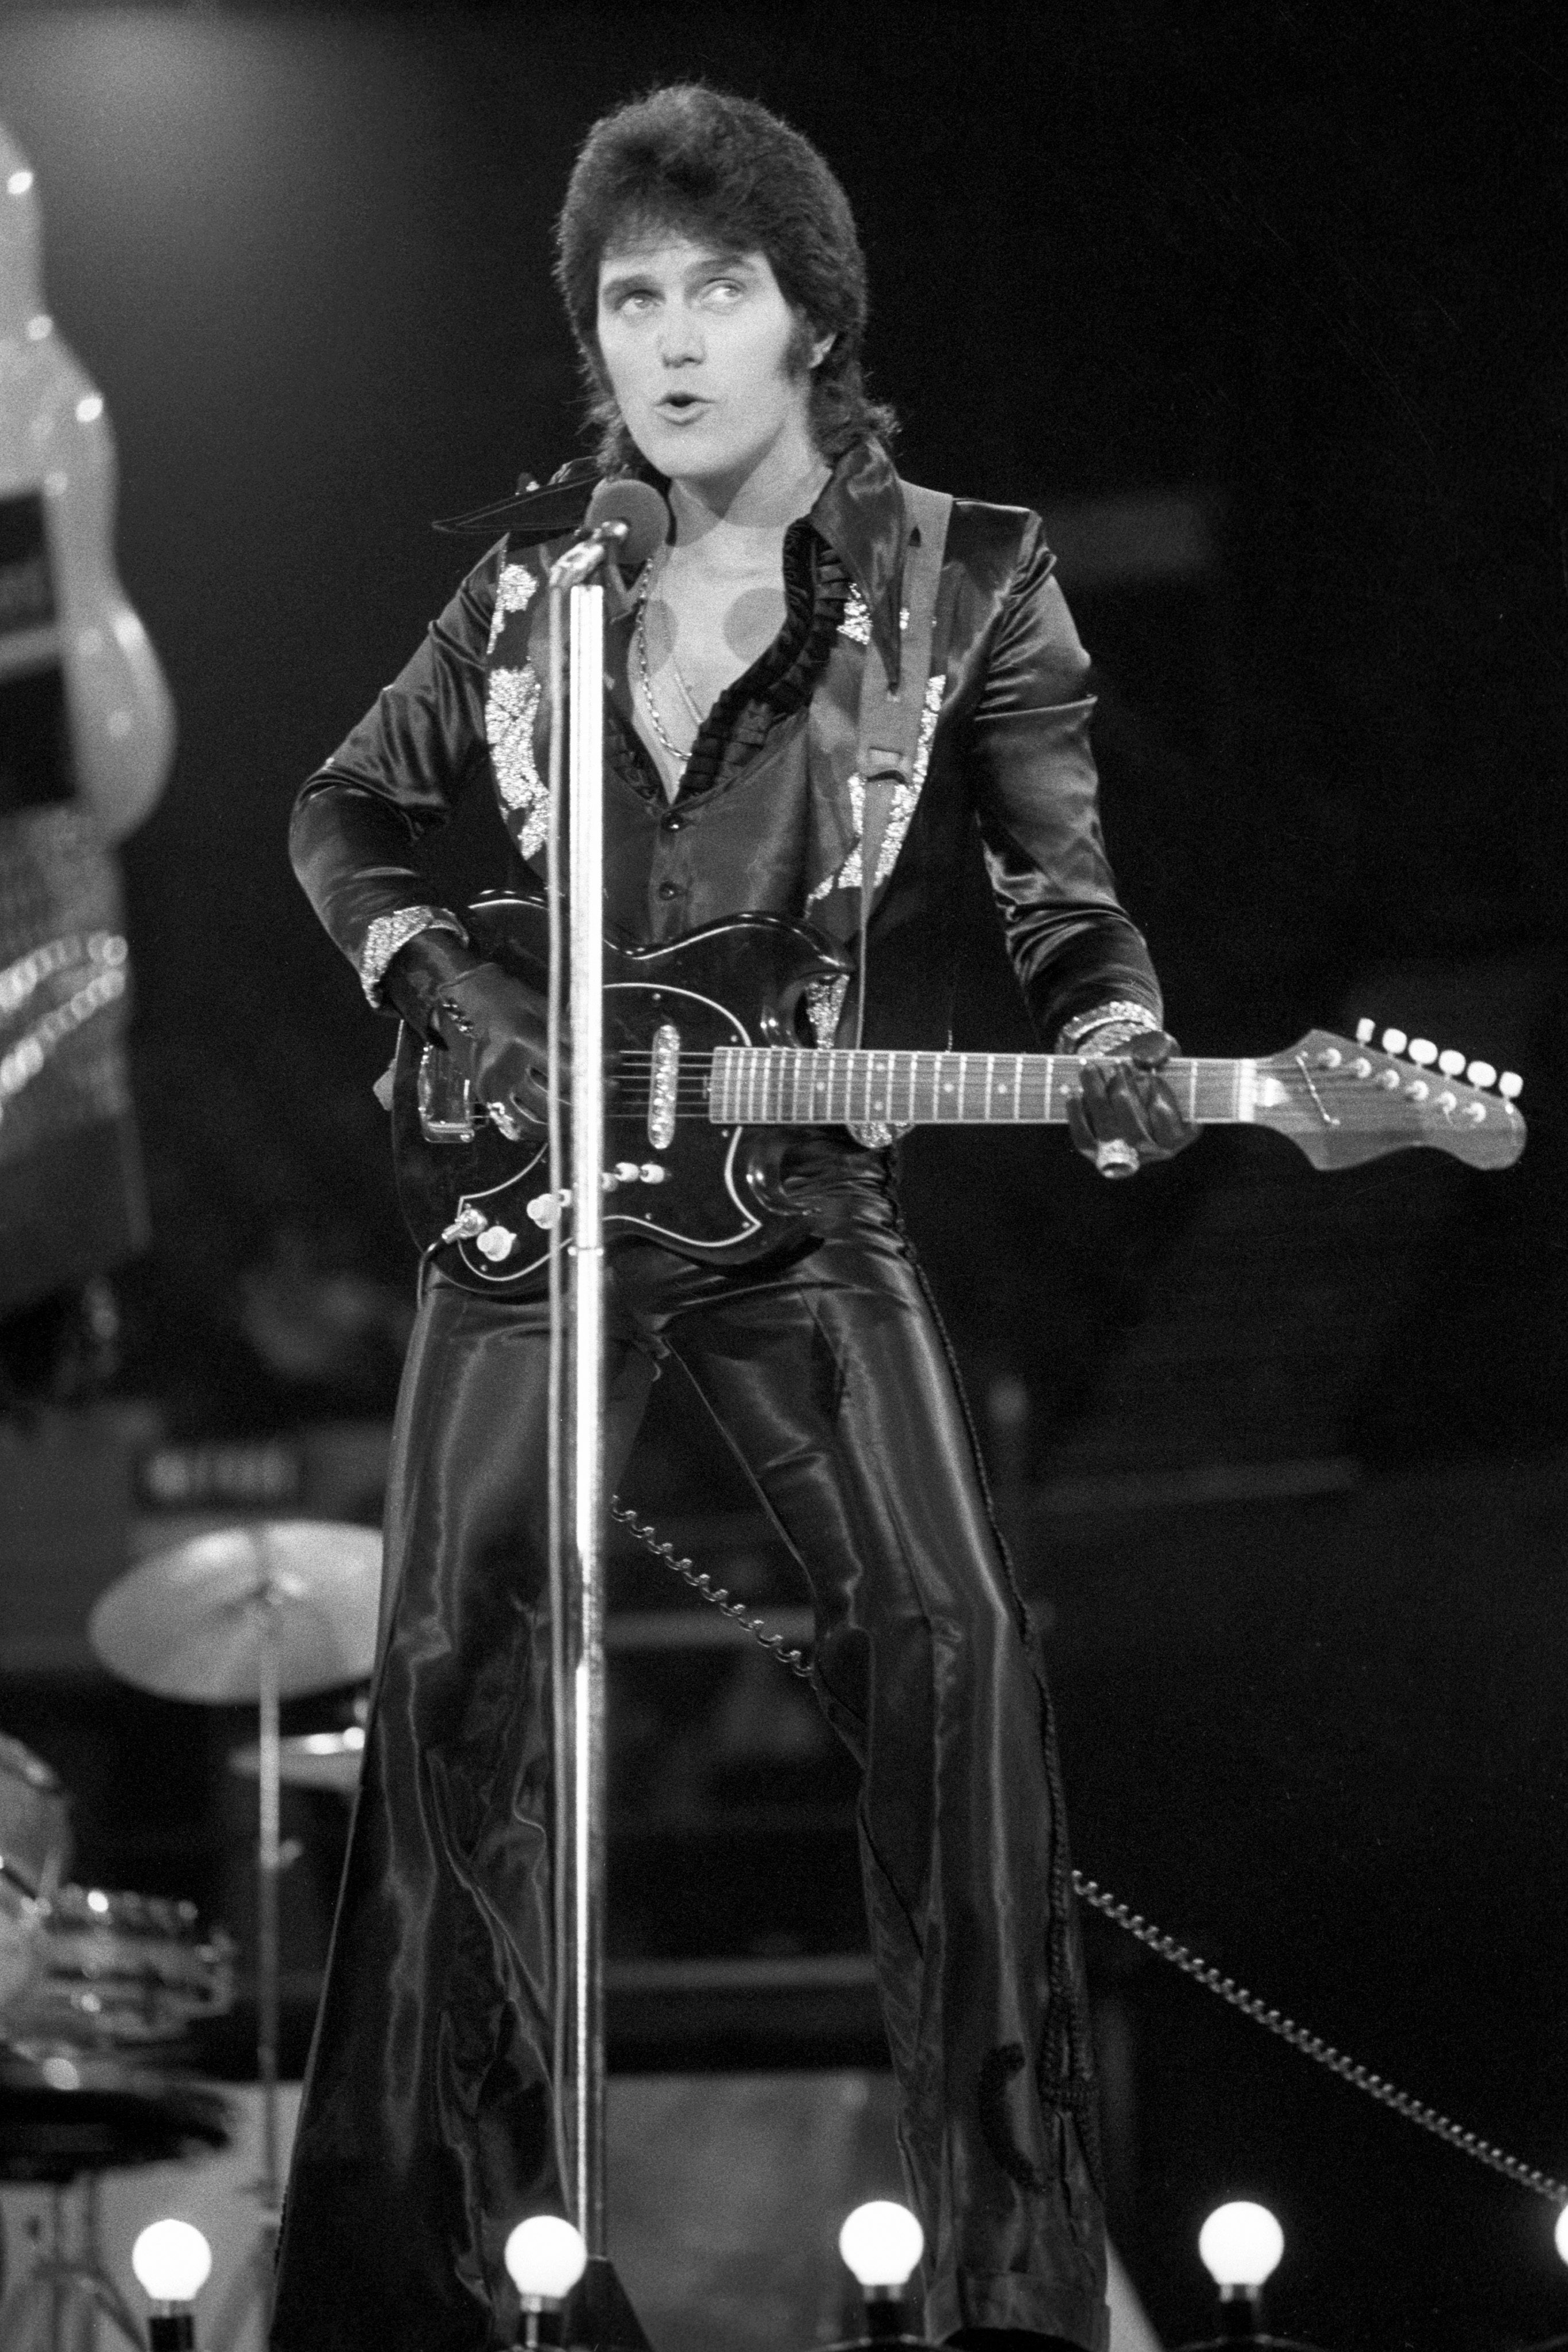 Pop singer Alvin Stardust performs at London Weekend Television's 'Saturday Scene' British Pop Awards at the Empire Pool, Wembley. Ref #: PA.21266299  Date: 16/11/1975